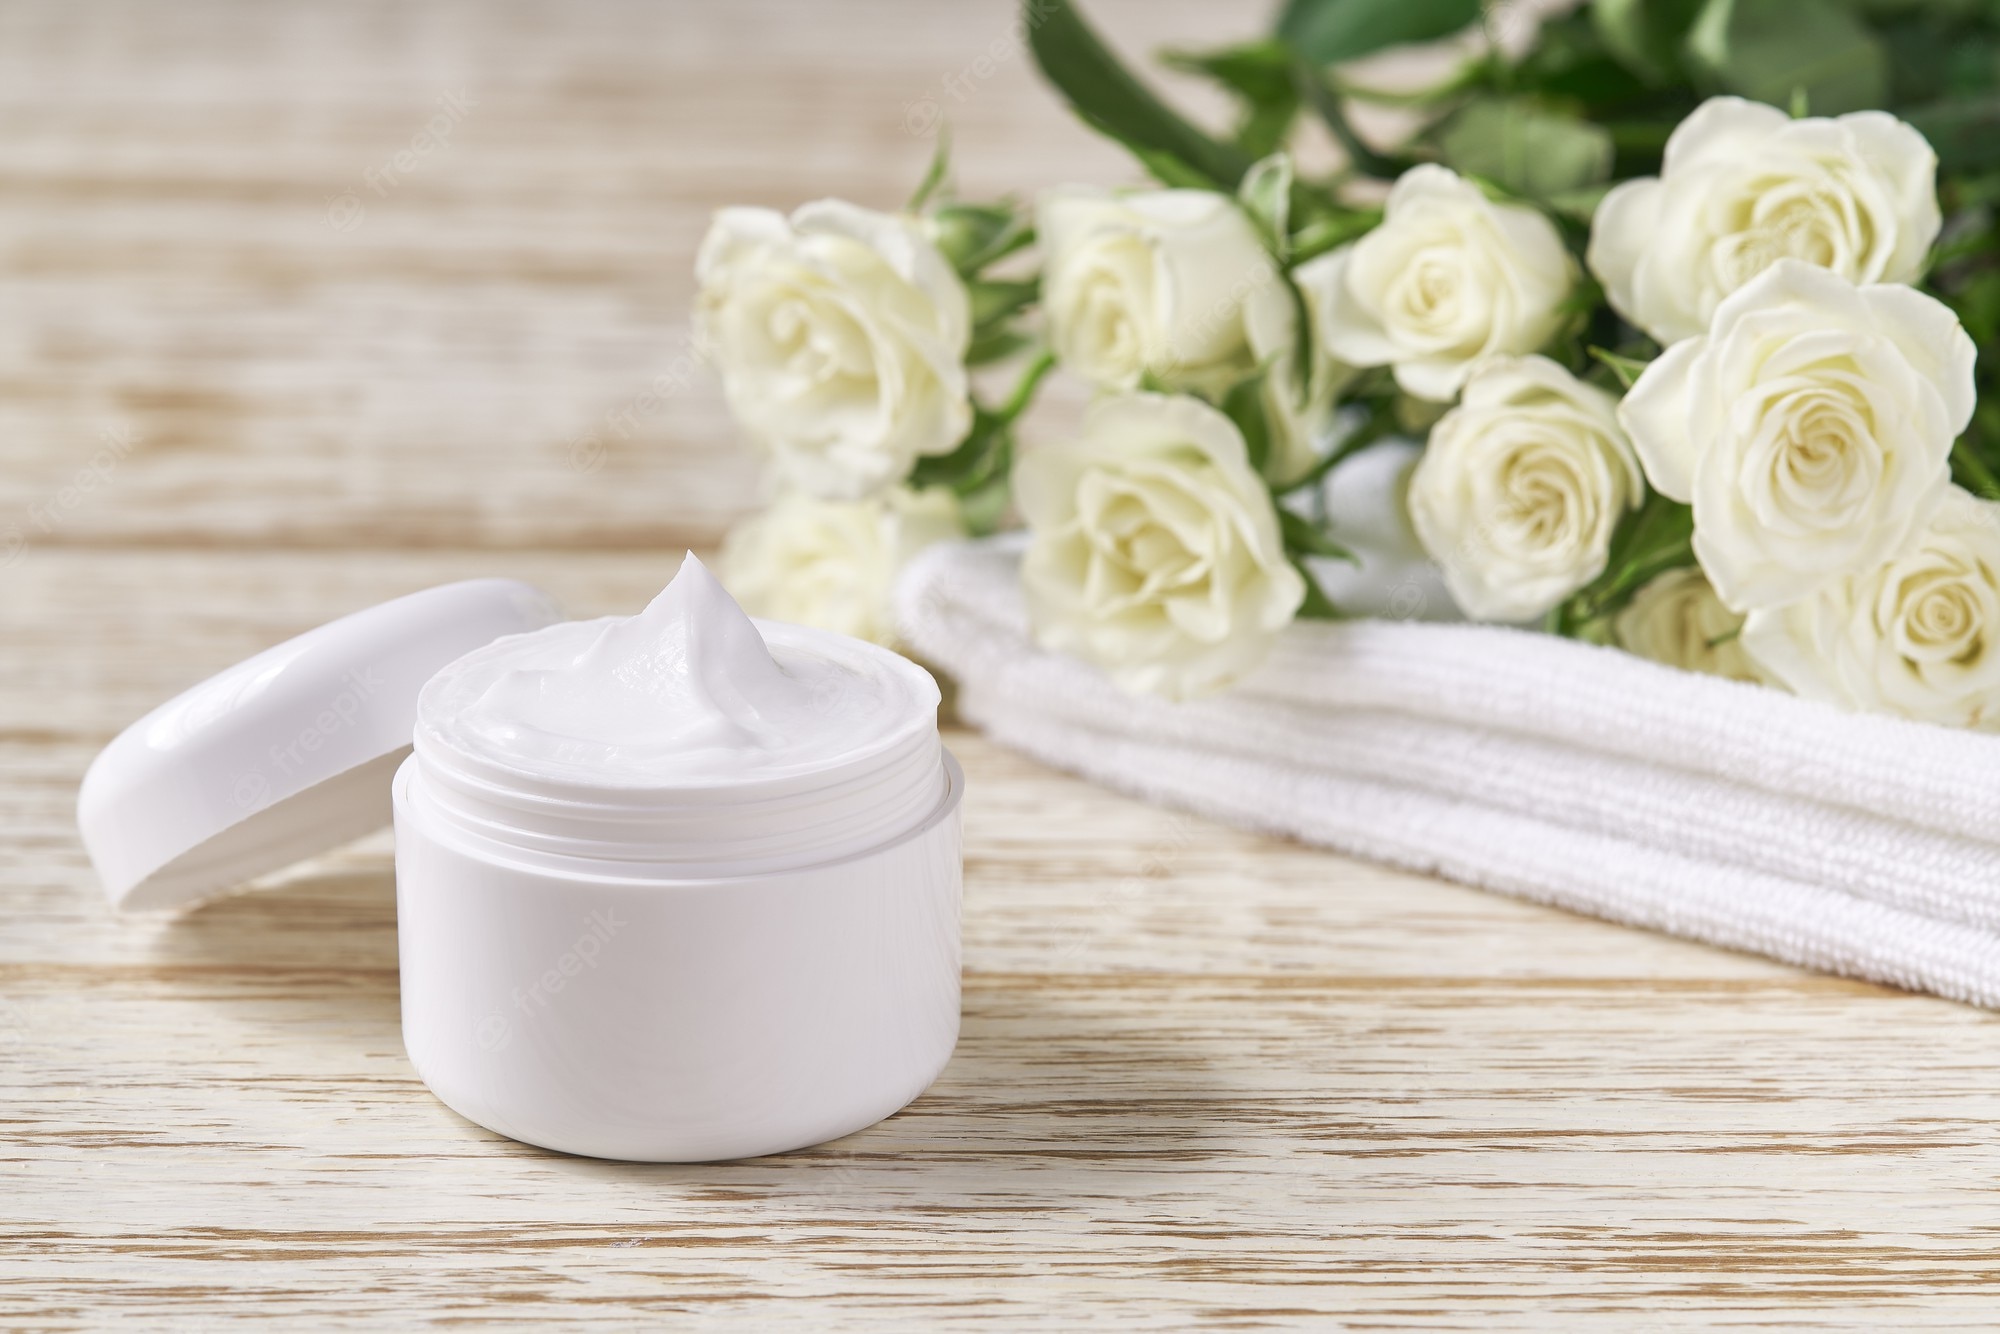 Premium Photo. Natural face cream or lotion sensitive skin, organic cosmetic product to moisturize the skin on a background of white roses. skin cleansing cosmetic luxury cream or vitamin spa lotion